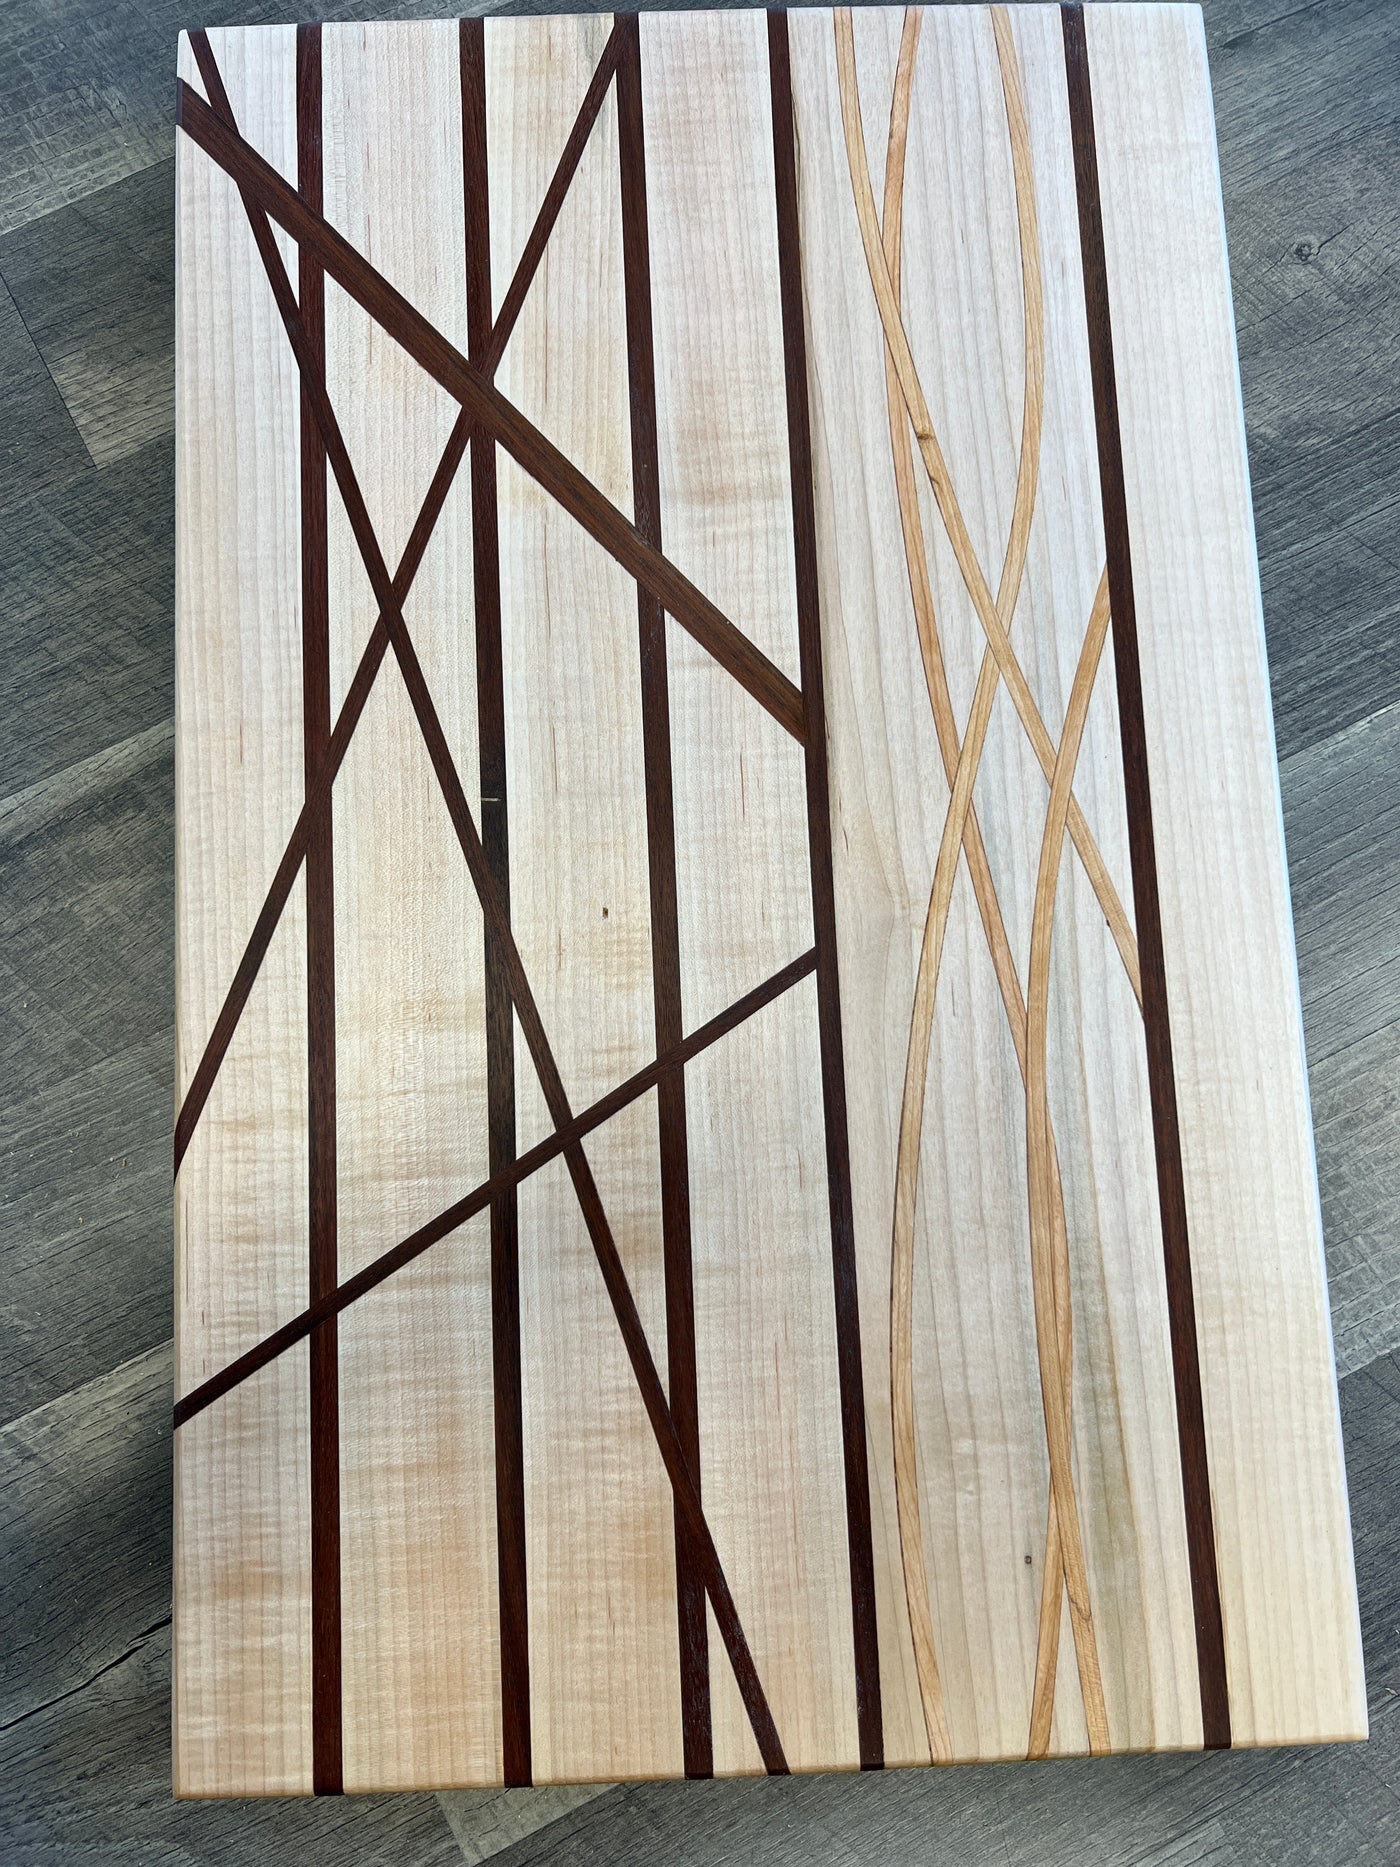 Artisanal Handcrafted Cutting Board #5